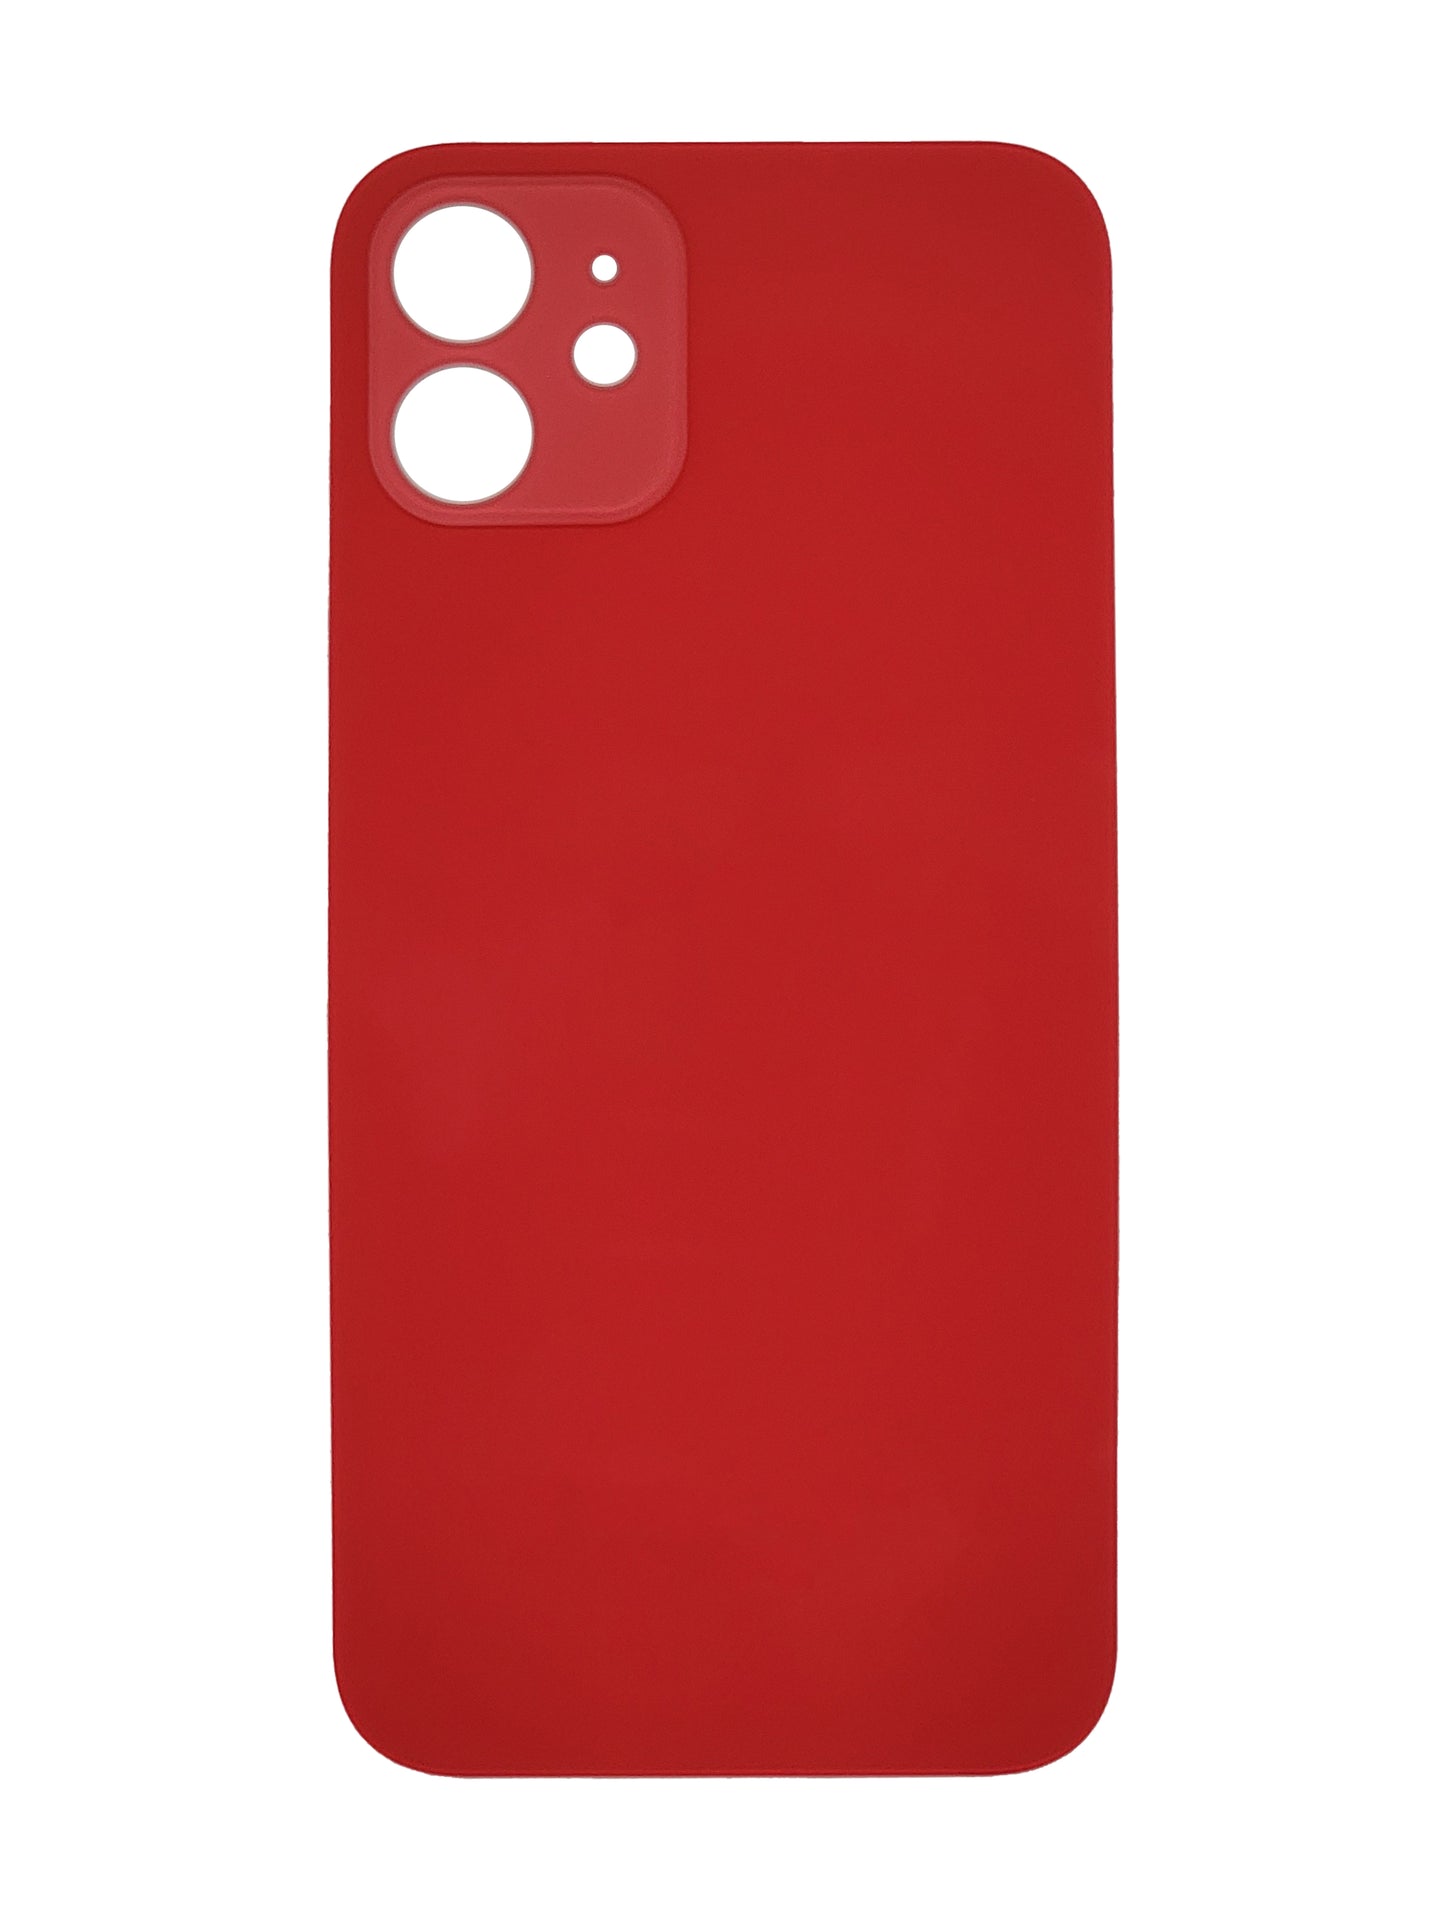 iPhone 12 Back Glass (No Logo) (Red)